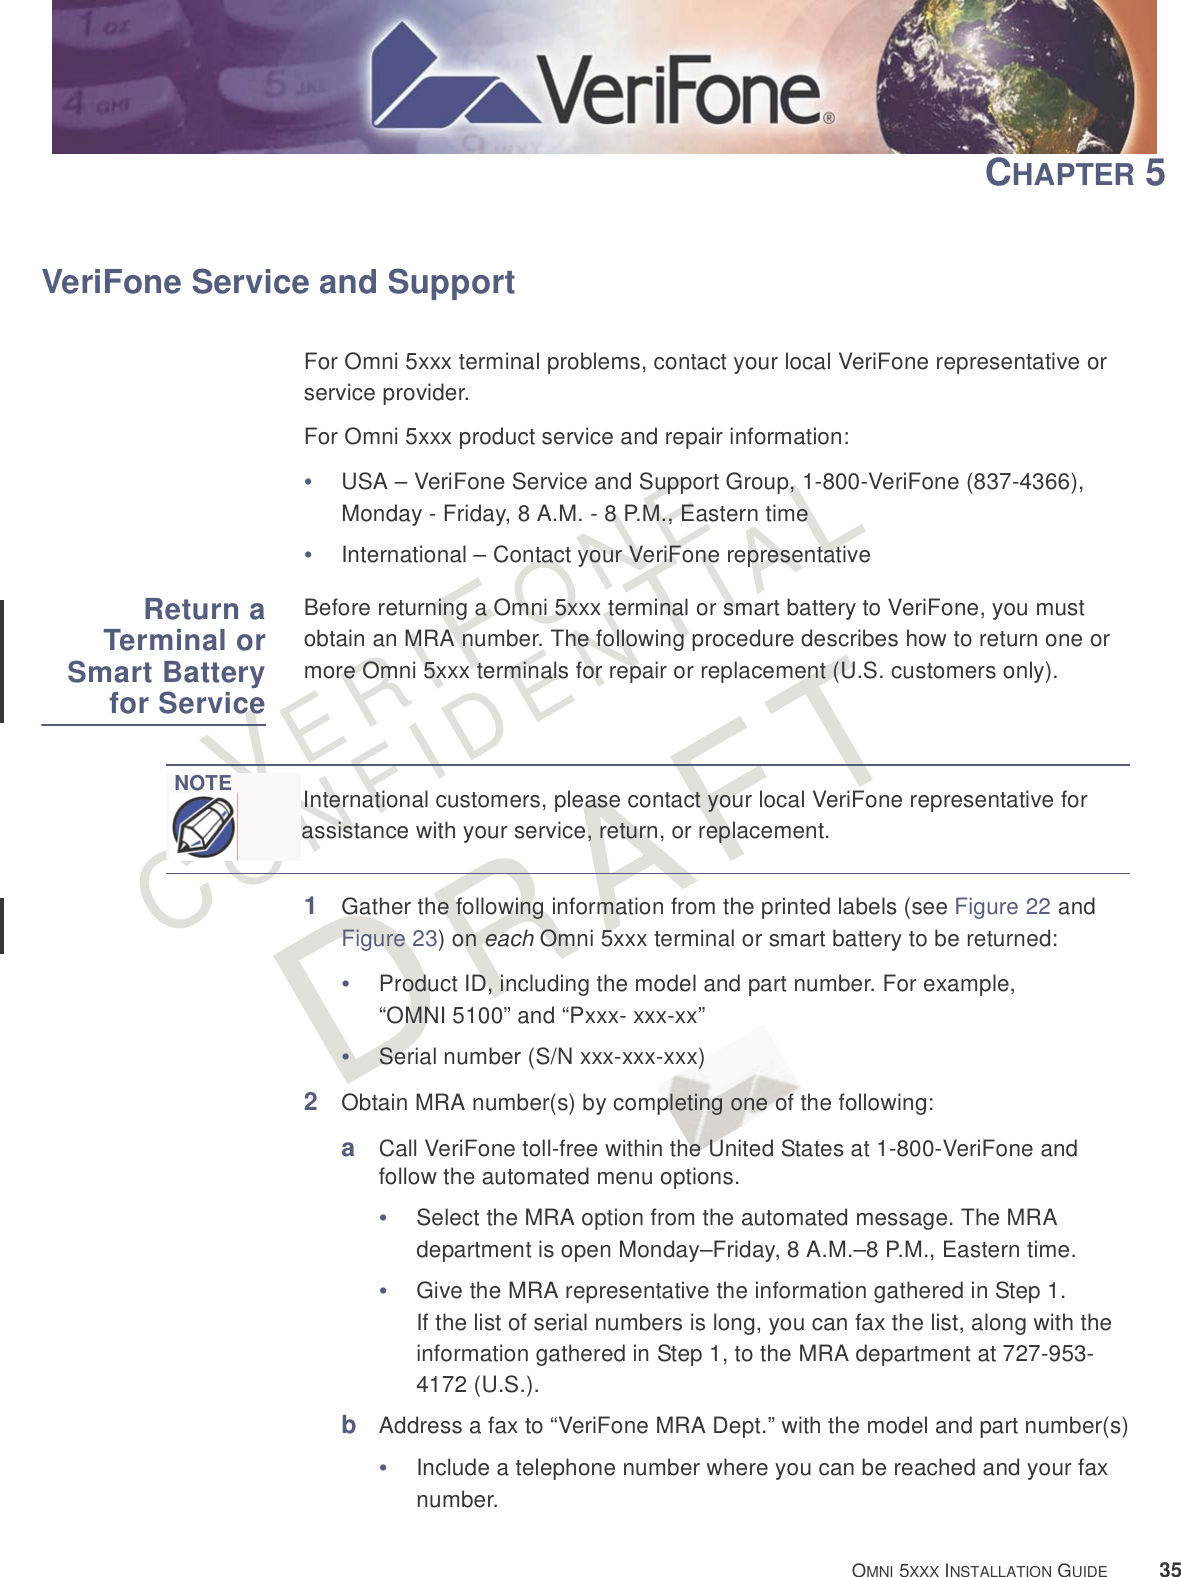 VERIFONECONFIDENTIALRAFT OMNI 5XXX INSTALLATION GUIDE 35CHAPTER 5VeriFone Service and SupportFor Omni 5xxx terminal problems, contact your local VeriFone representative or service provider. For Omni 5xxx product service and repair information:•USA – VeriFone Service and Support Group, 1-800-VeriFone (837-4366), Monday - Friday, 8 A.M. - 8 P.M., Eastern time•International – Contact your VeriFone representative Return aTerminal orSmart Batteryfor ServiceBefore returning a Omni 5xxx terminal or smart battery to VeriFone, you must obtain an MRA number. The following procedure describes how to return one or more Omni 5xxx terminals for repair or replacement (U.S. customers only). 1Gather the following information from the printed labels (see Figure 22 and Figure 23) on each Omni 5xxx terminal or smart battery to be returned:•Product ID, including the model and part number. For example, “OMNI 5100” and “Pxxx- xxx-xx”•Serial number (S/N xxx-xxx-xxx)2Obtain MRA number(s) by completing one of the following:aCall VeriFone toll-free within the United States at 1-800-VeriFone and follow the automated menu options.•Select the MRA option from the automated message. The MRA department is open Monday–Friday, 8 A.M.–8 P.M., Eastern time.•Give the MRA representative the information gathered in Step 1.If the list of serial numbers is long, you can fax the list, along with the information gathered in Step 1, to the MRA department at 727-953-4172 (U.S.).bAddress a fax to “VeriFone MRA Dept.” with the model and part number(s)•Include a telephone number where you can be reached and your fax number.NOTEInternational customers, please contact your local VeriFone representative for assistance with your service, return, or replacement.